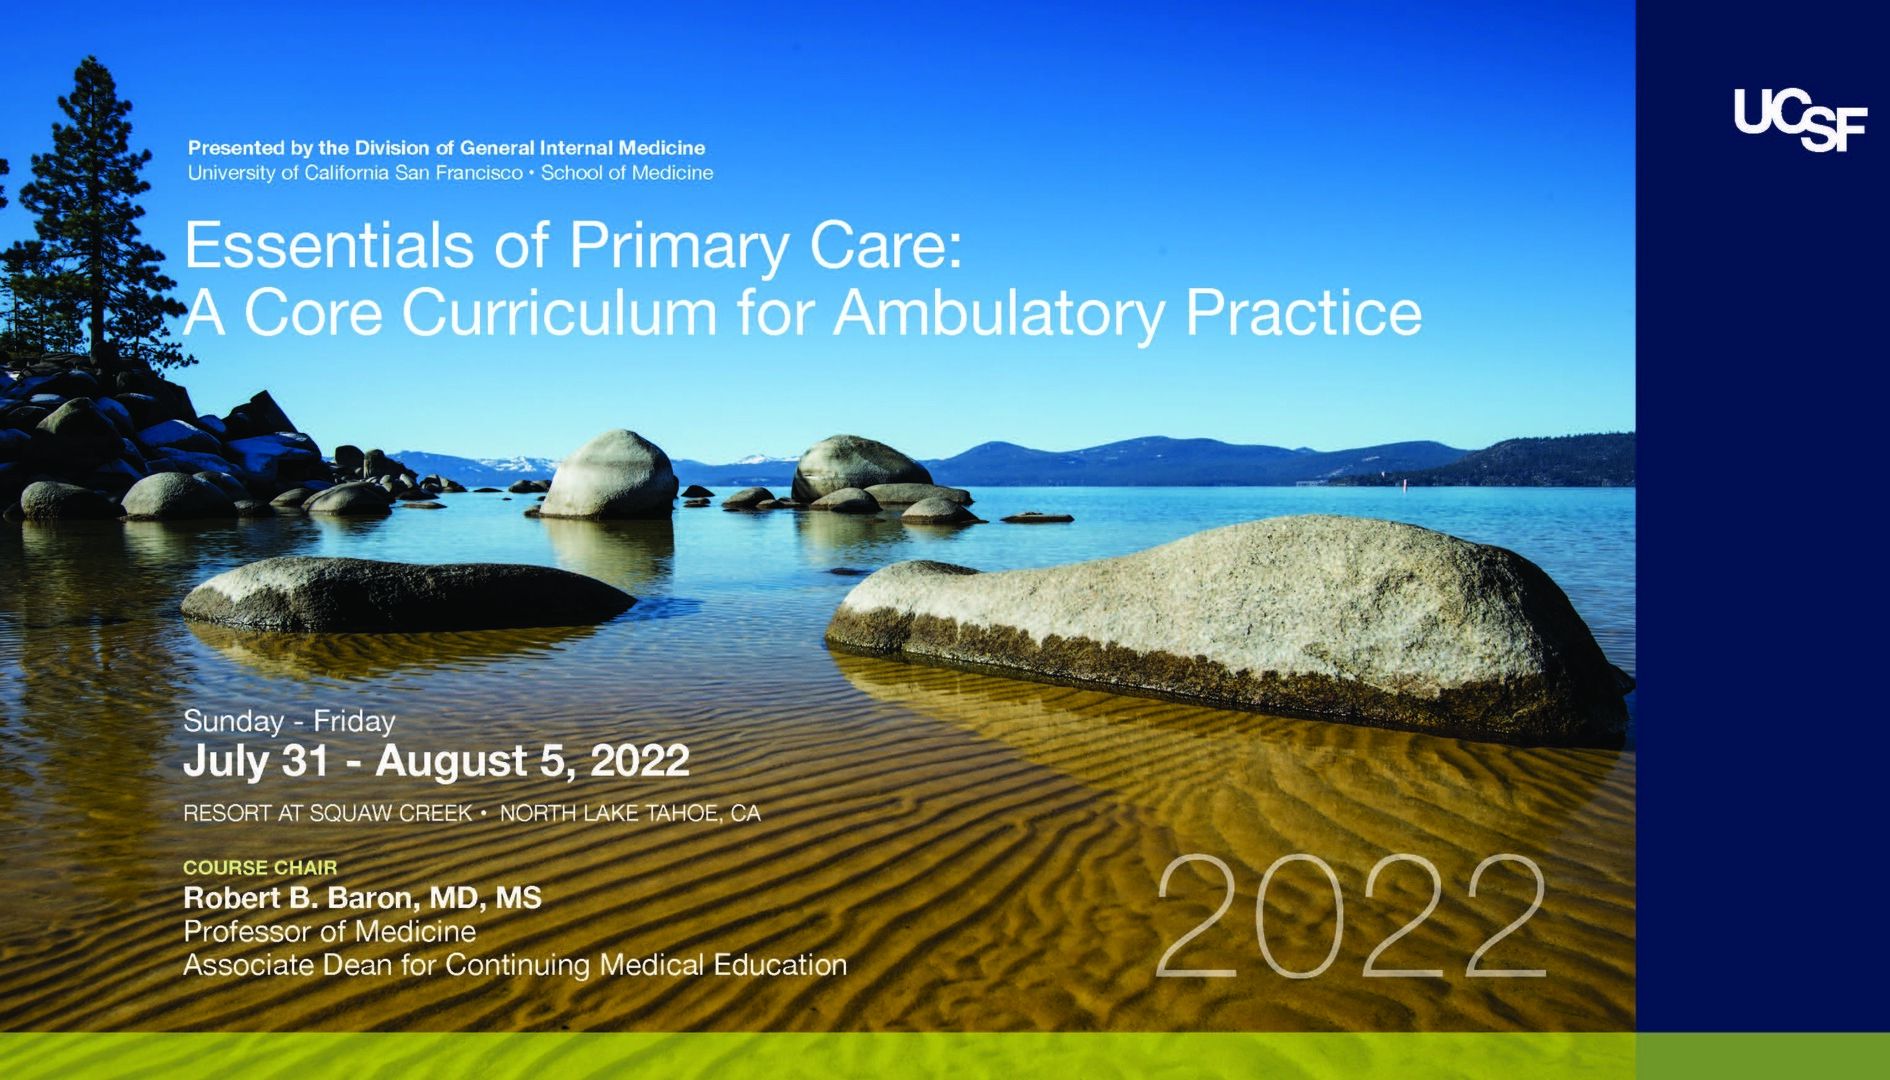 UCSF Essentials of Primary Care: A Core Curriculum for Ambulatory Practice, Olympic Valley, California, United States